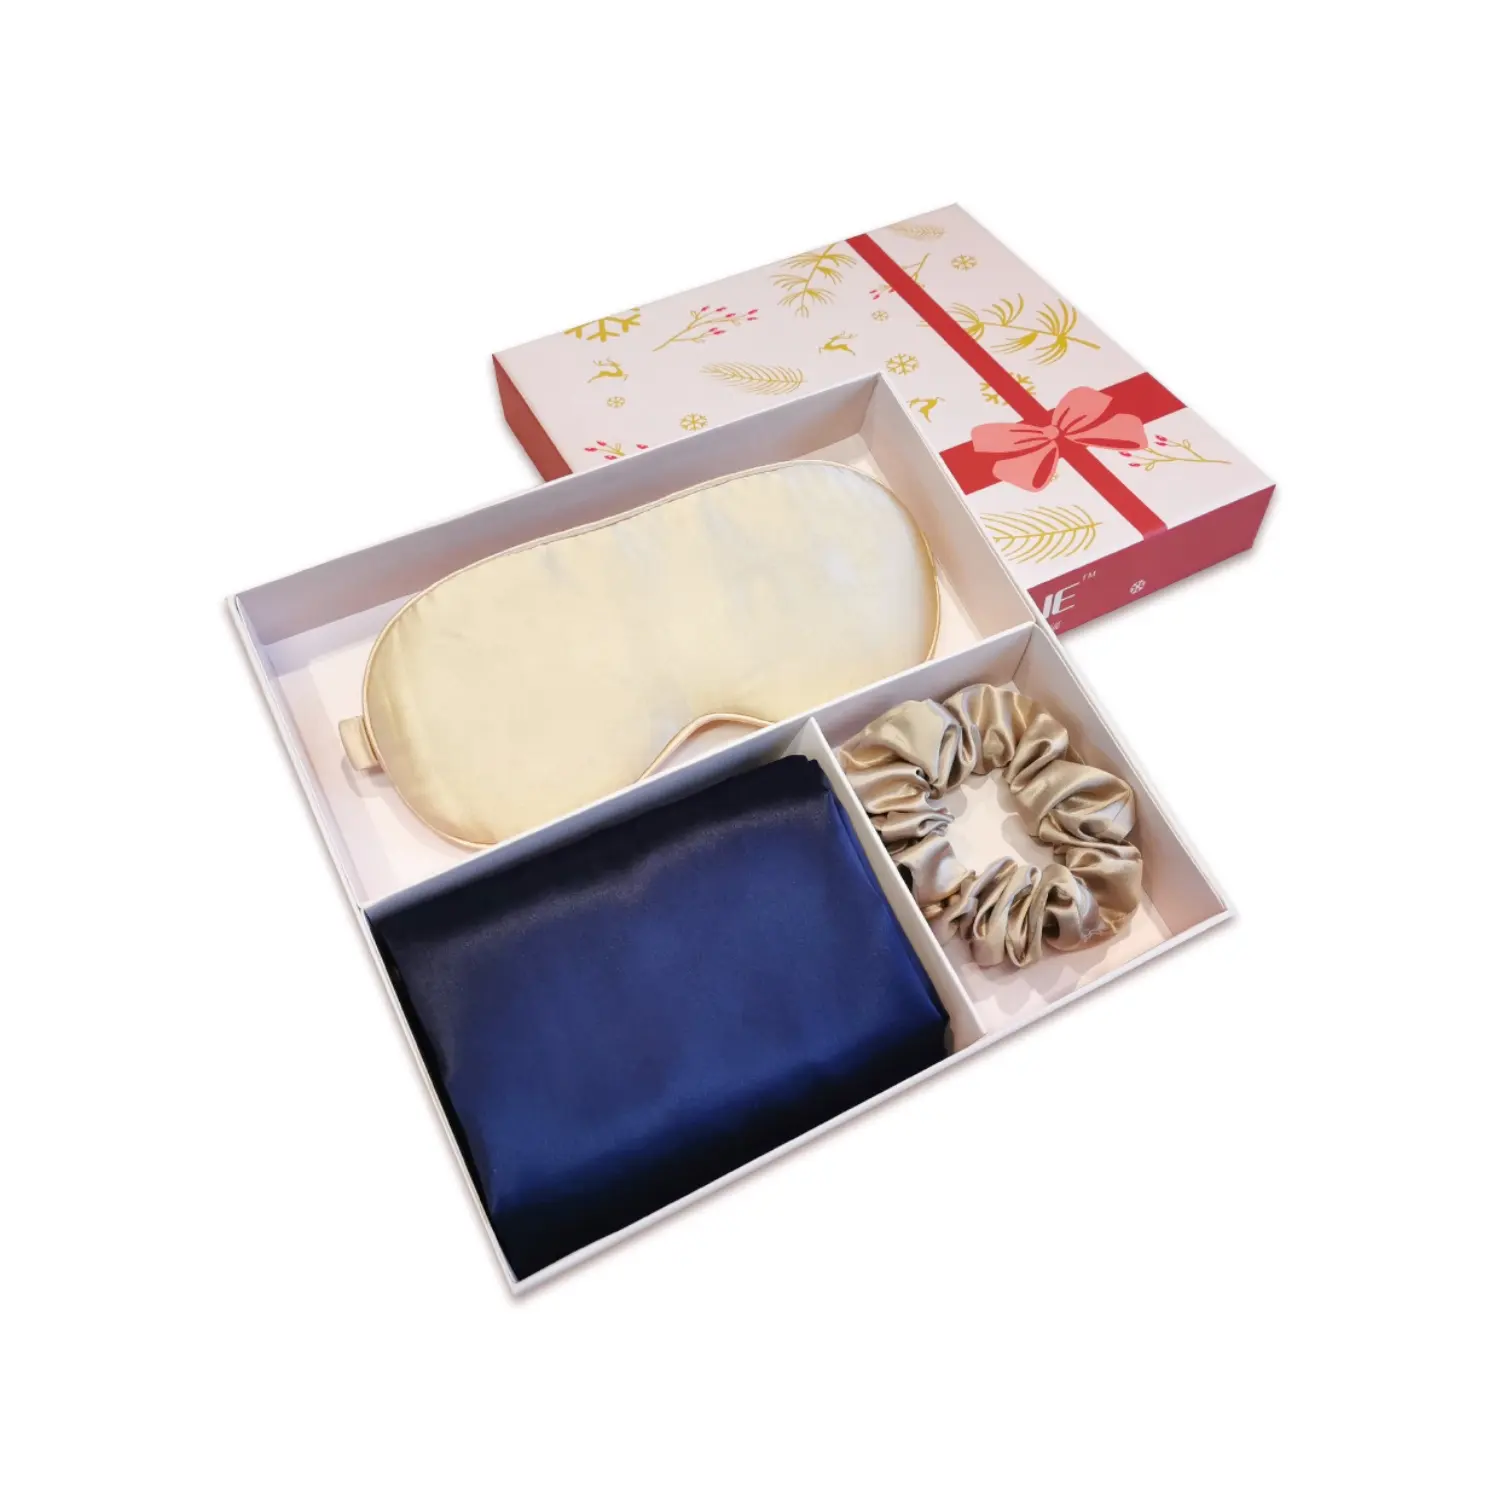 Christmas blind gift box 3 pieces silk items included pillowcase eye mask and scrunchies